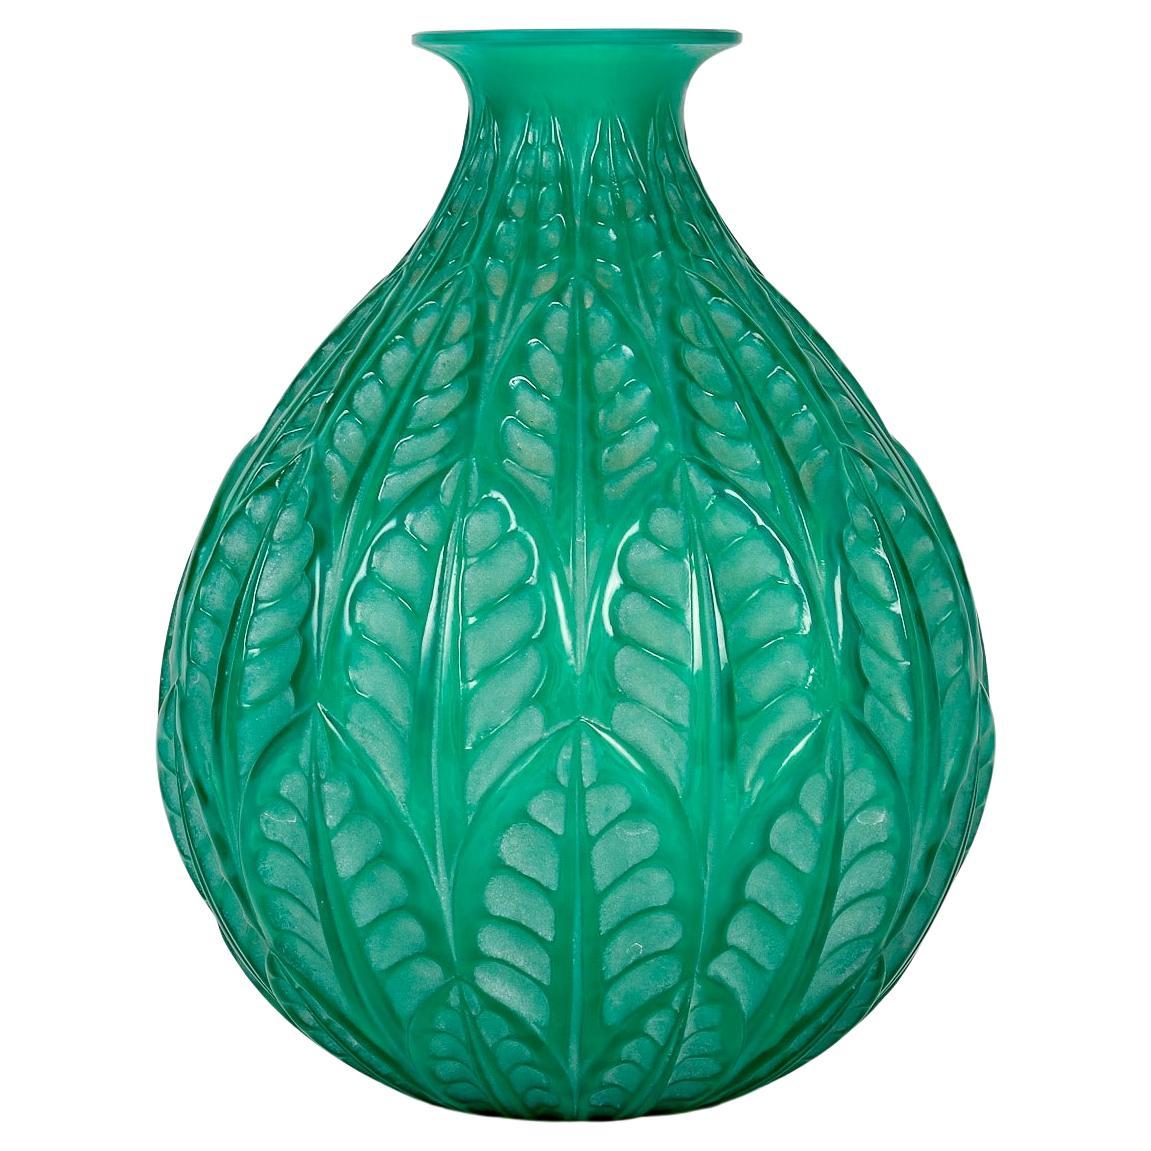 1927 René Lalique Vase Malesherbes Jade Peppermint Green Glass White Patina